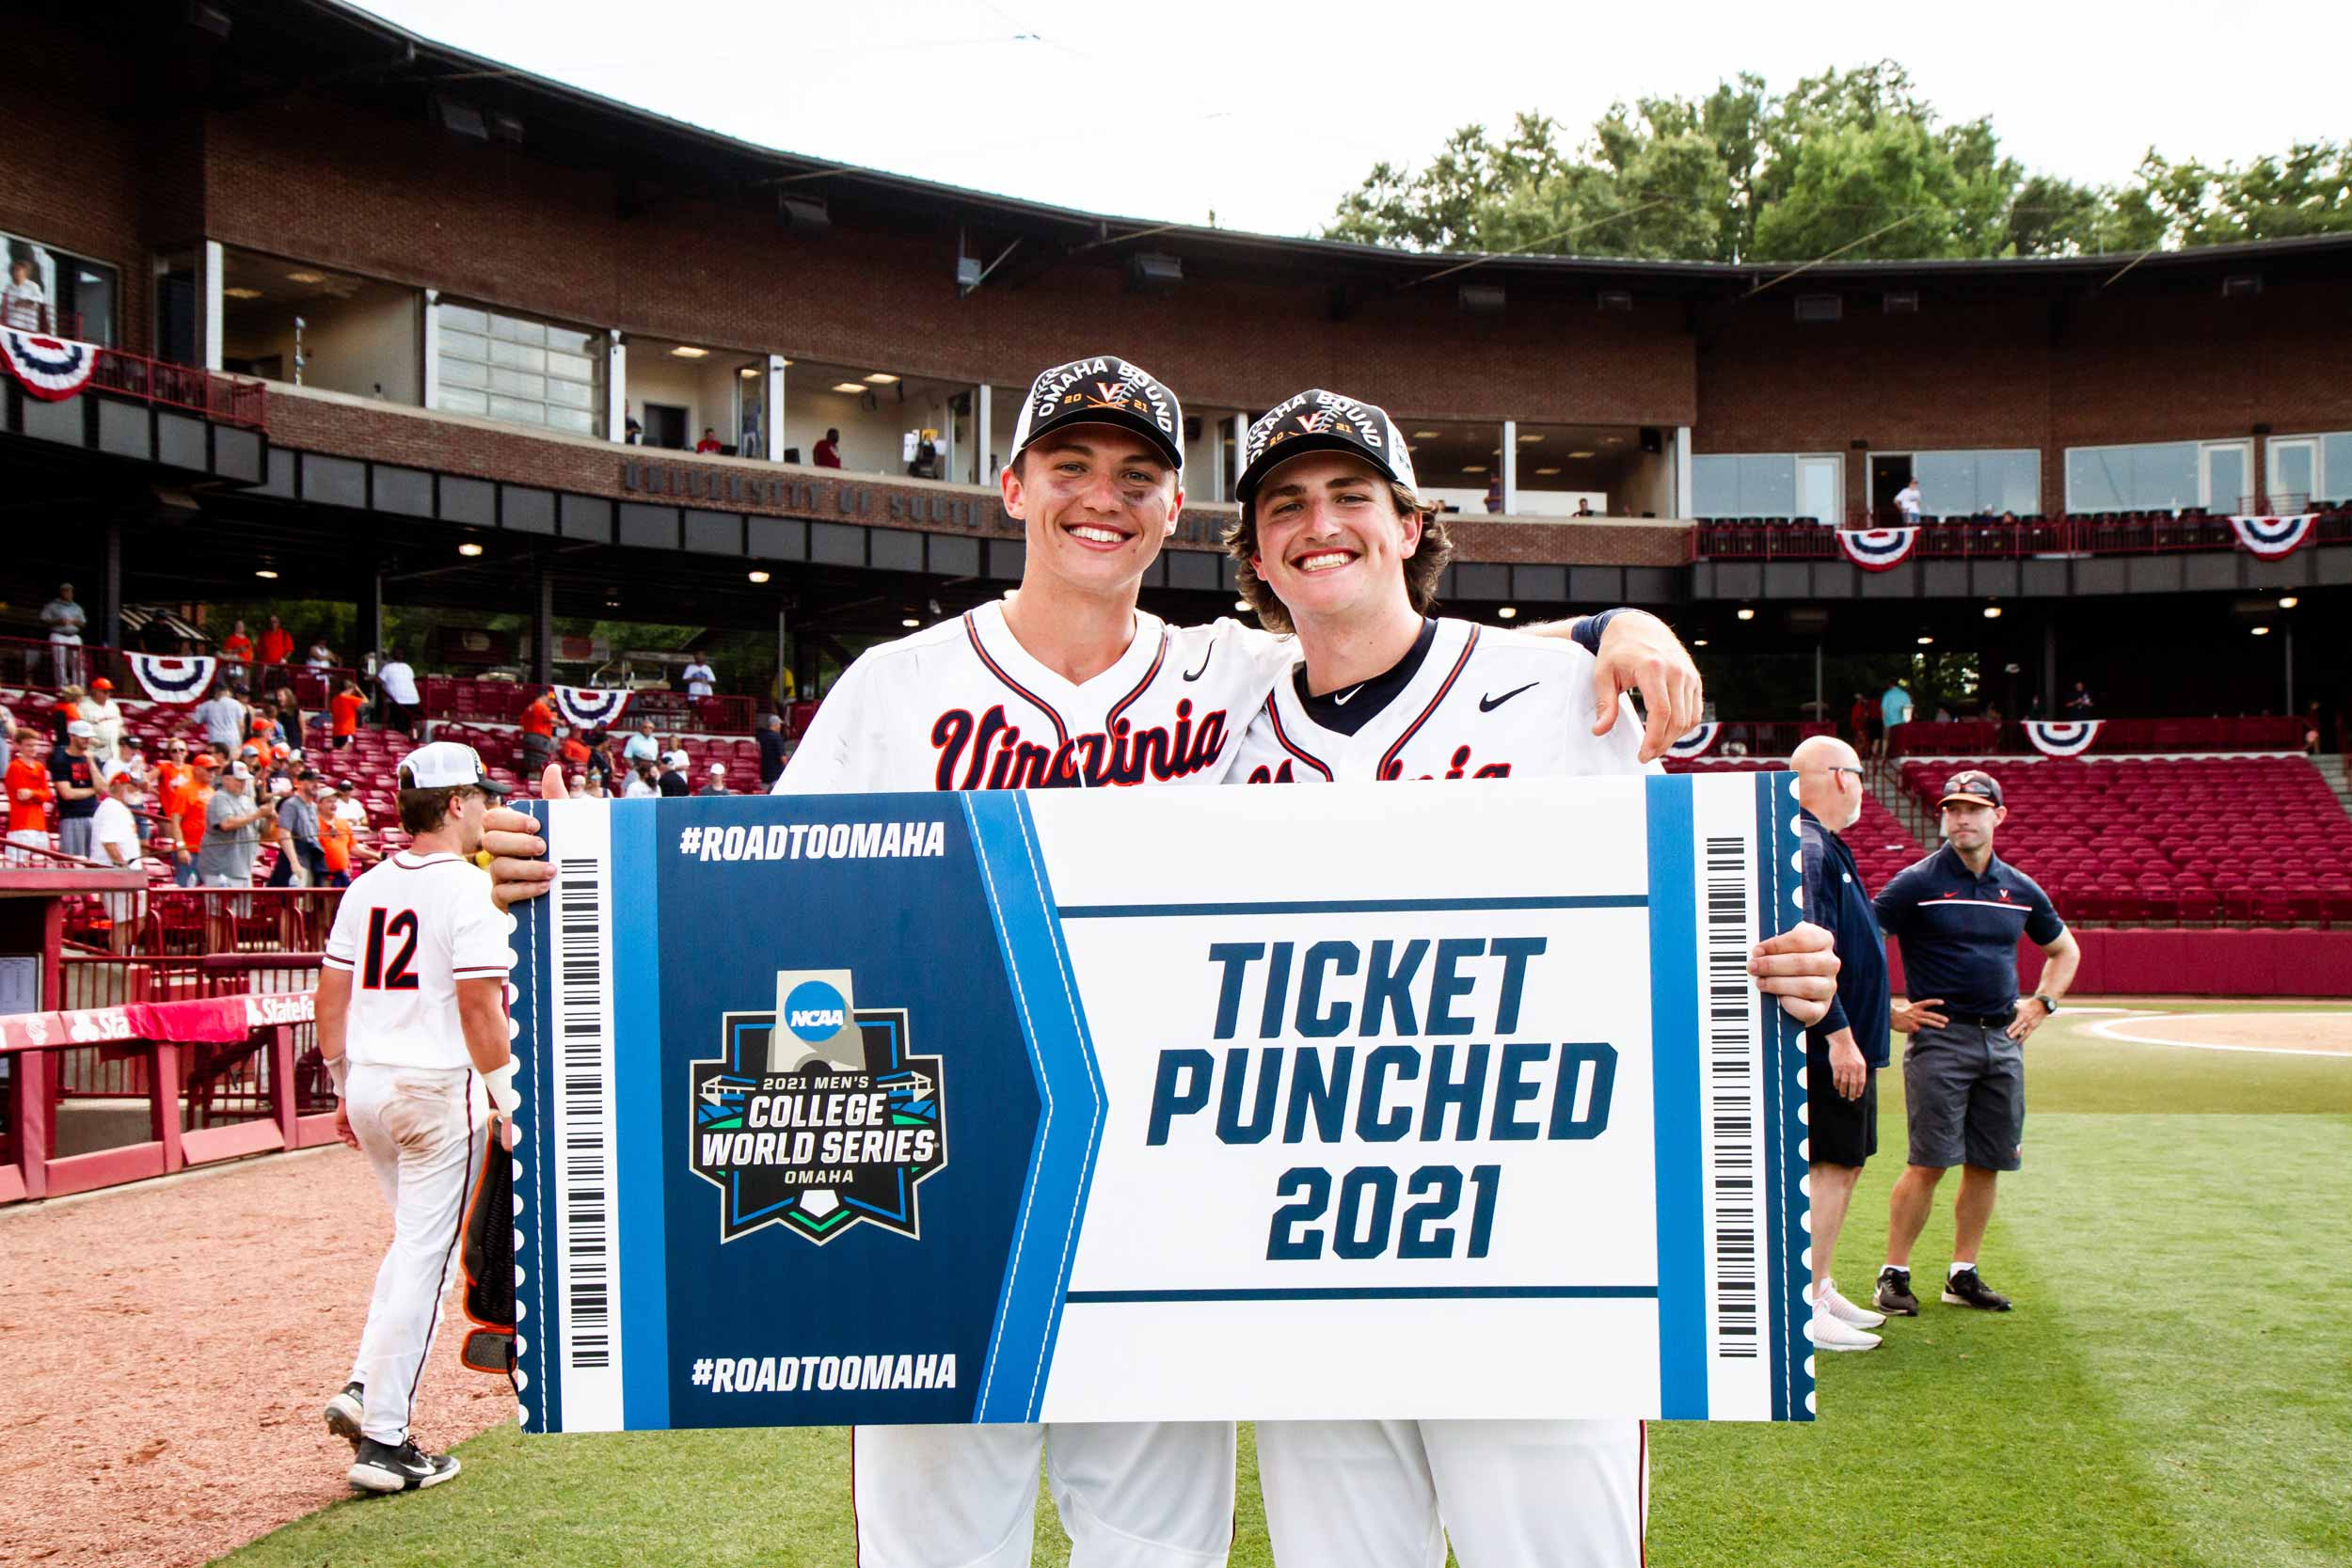 Zack, left, and Jake Gelof holding a Ticket Punched sign 